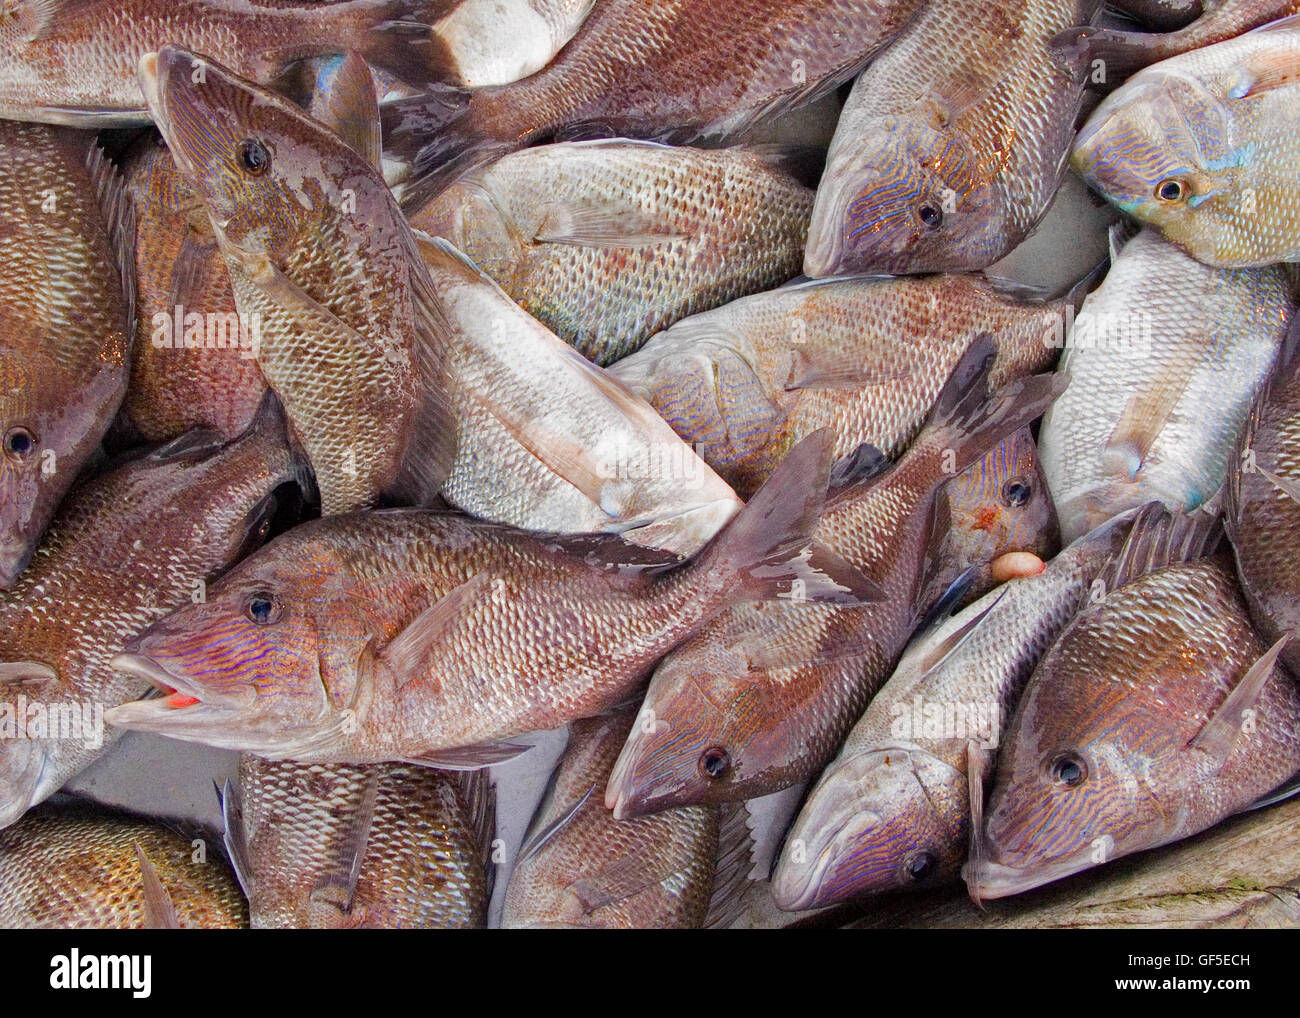 A bounty of fish fresh off the boat at an open market in Fort Myers, Florida, USA. Stock Photo